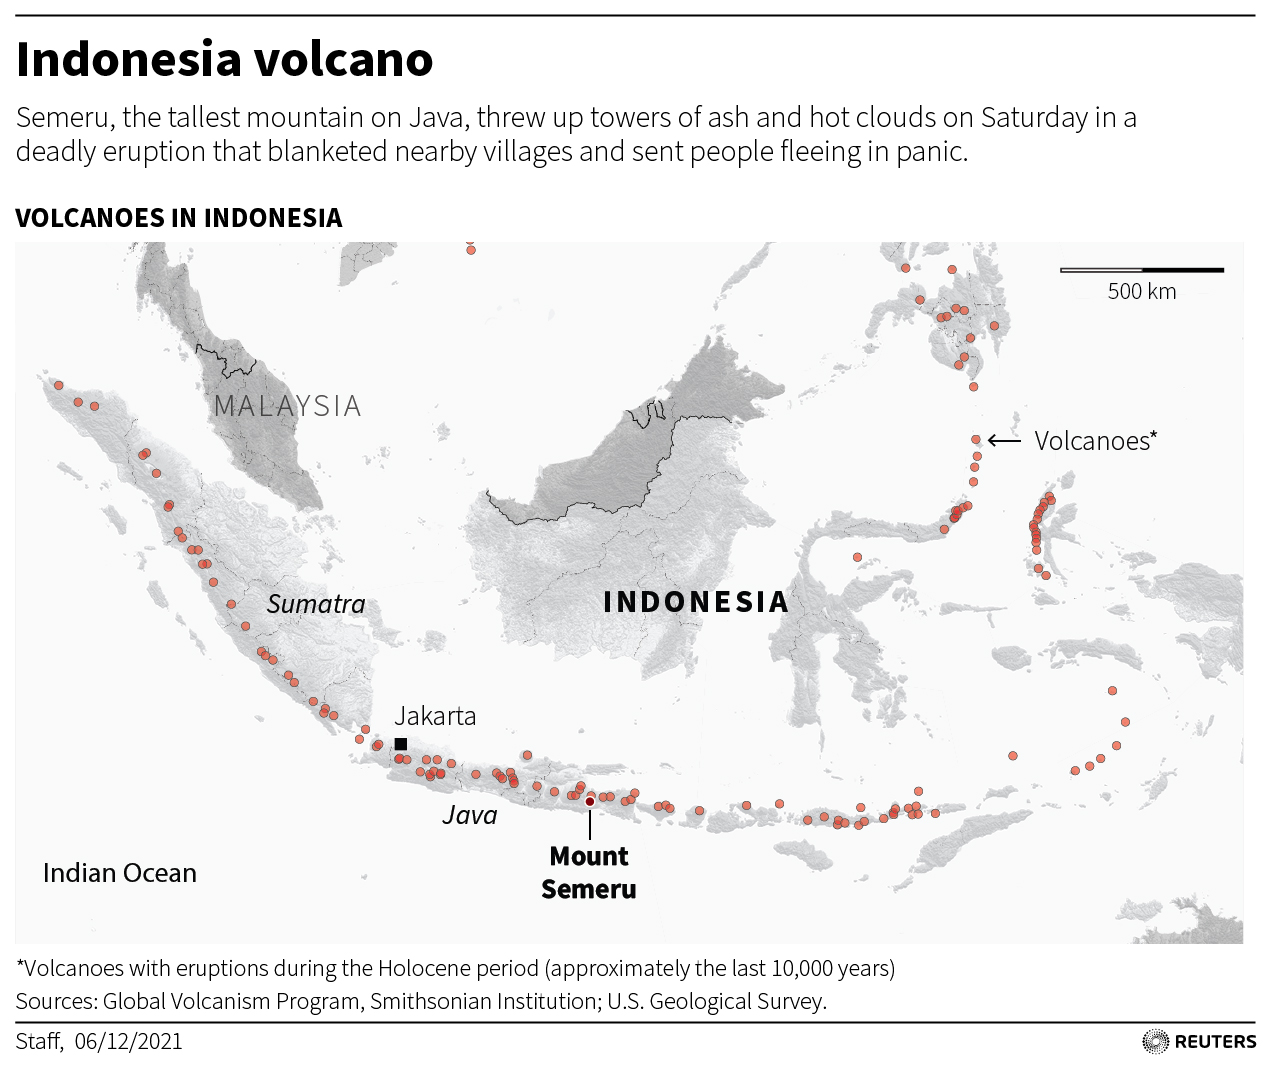 Map locating Semeru volcano in Indonesia. Includes locations of other active volcanoes.